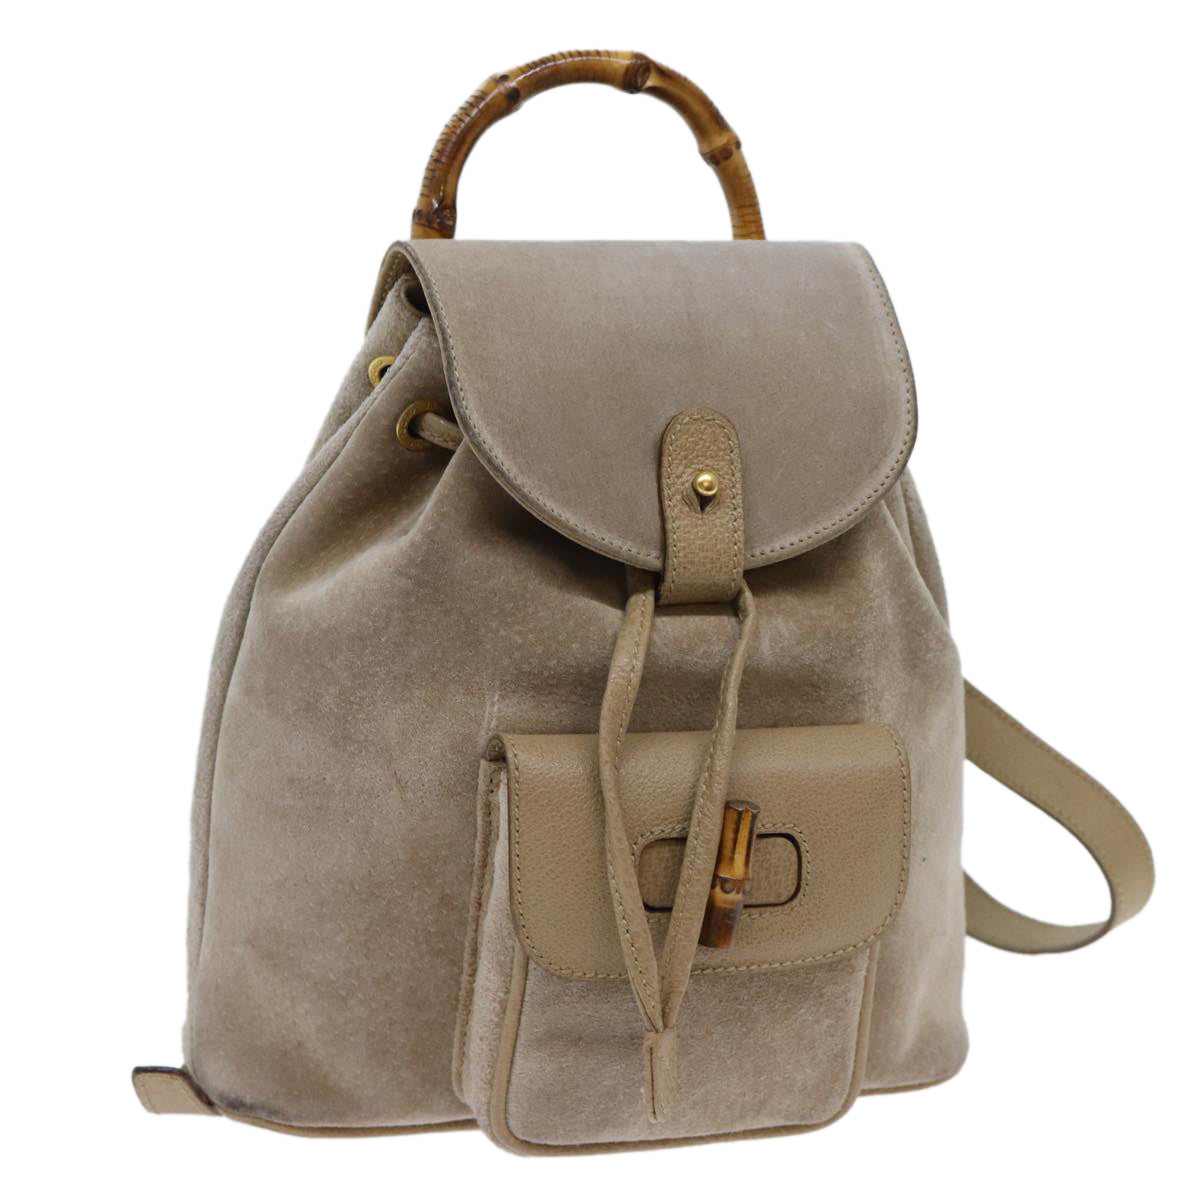 GUCCI Bamboo Backpack Suede Beige 003 3444 0030 Auth yk11065